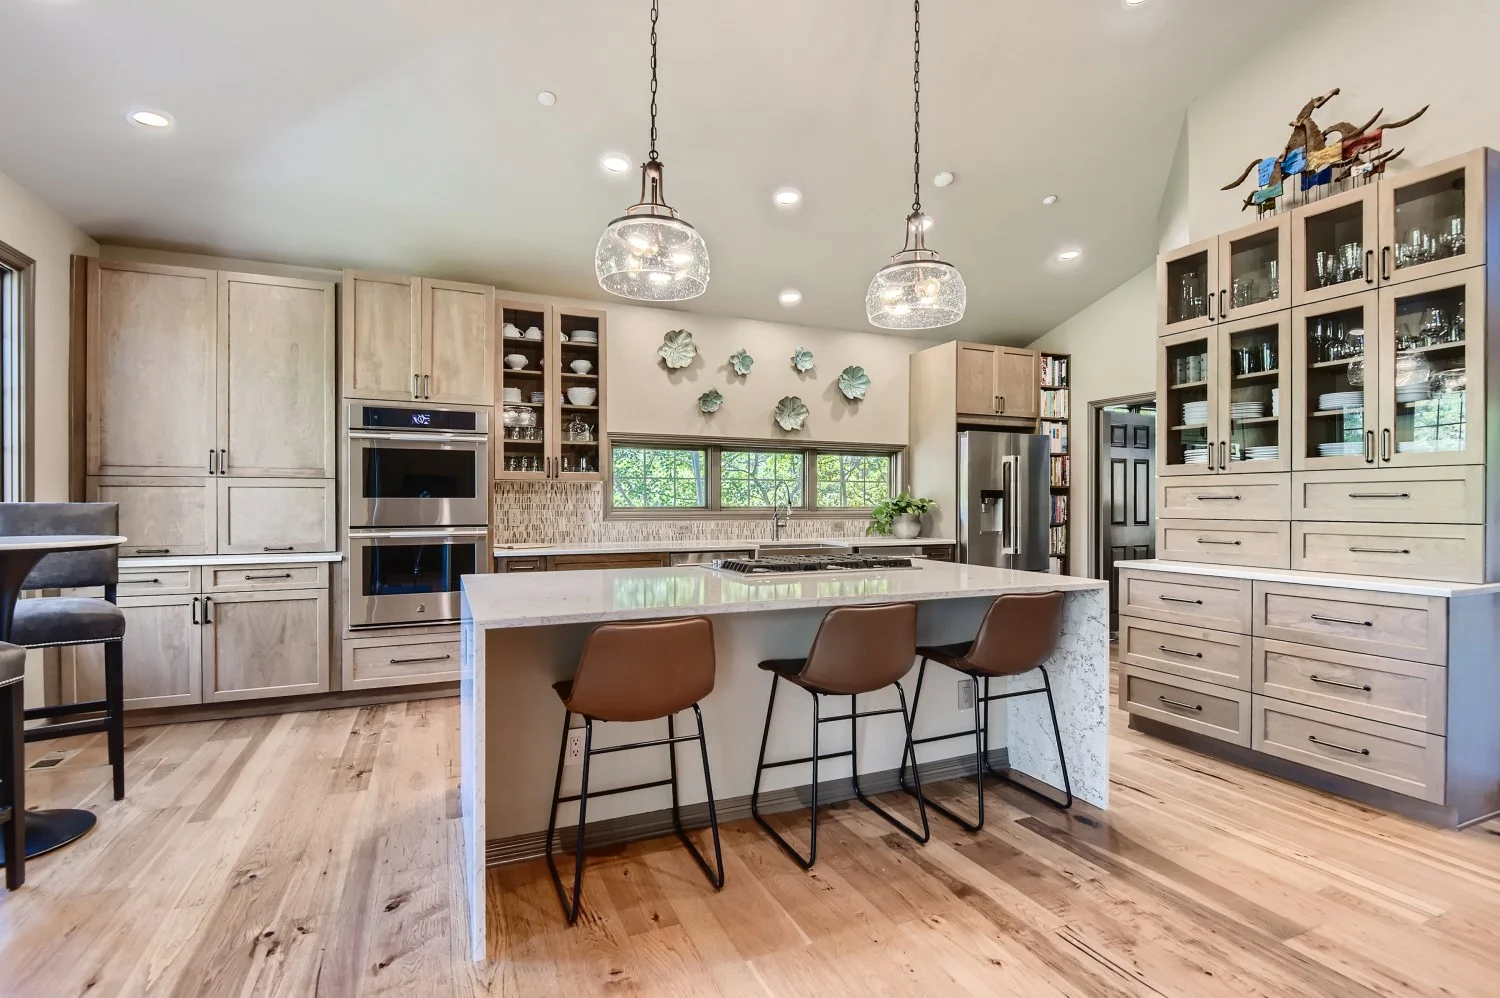 How do you choose the right flooring for your Kitchen?